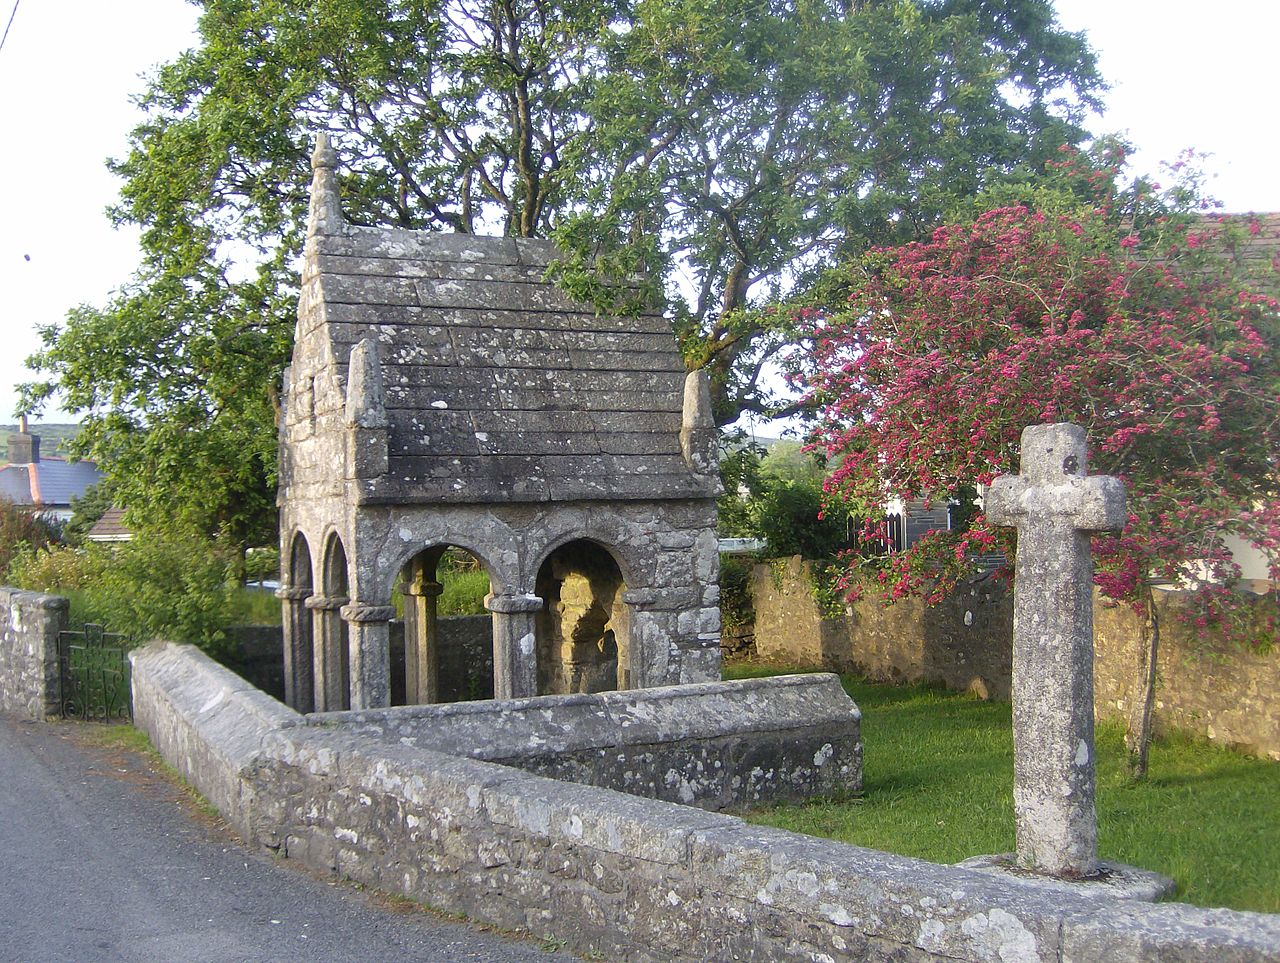 St Cleer Well